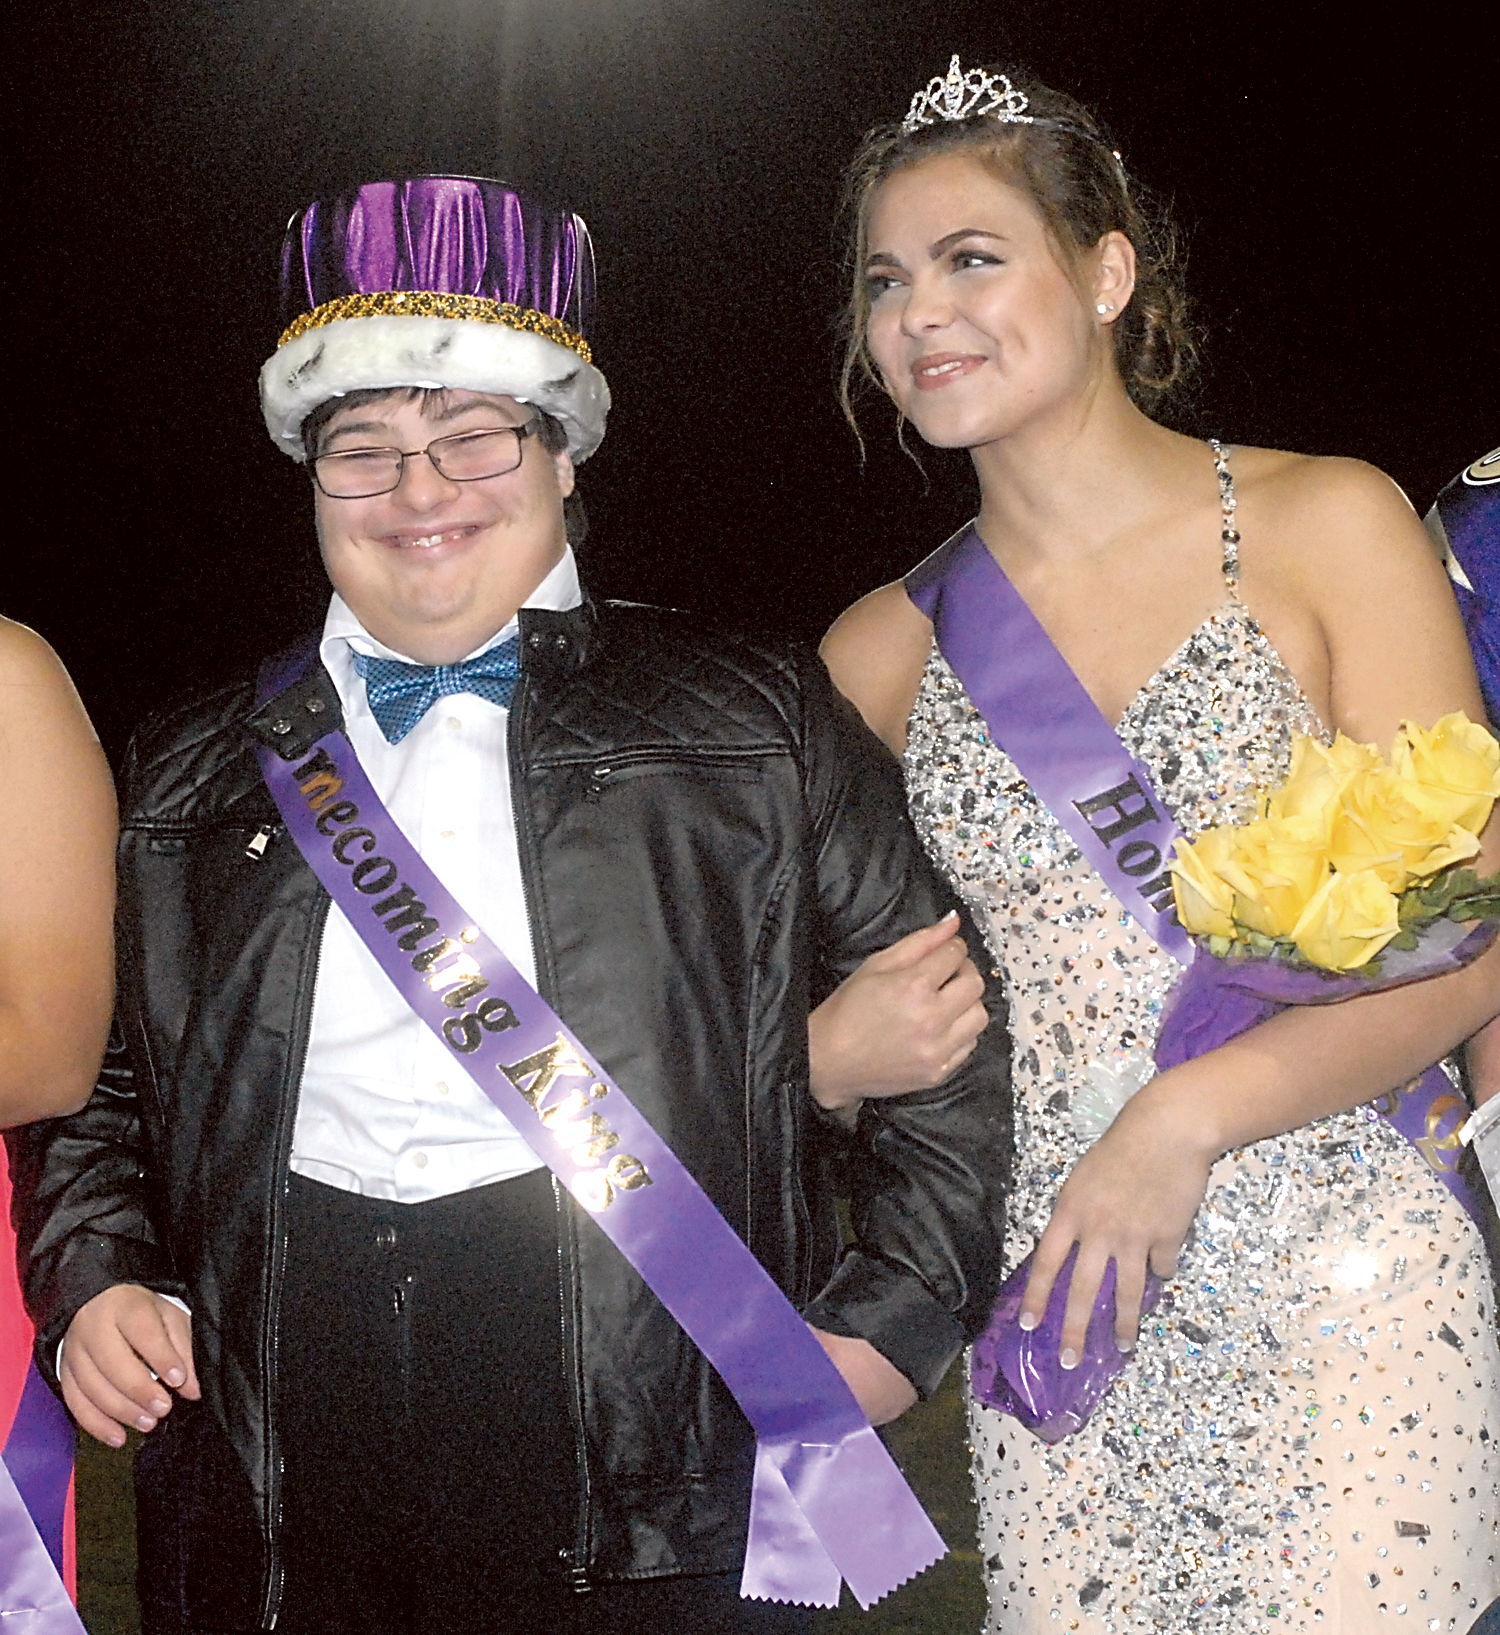 Sequim homecoming senior royalty King Nick Barrett and Queen Katie Rogers smile after their coronation at halftime of Friday night's game against Port Angeles. Keith Thorpe/Peninsula Daily News